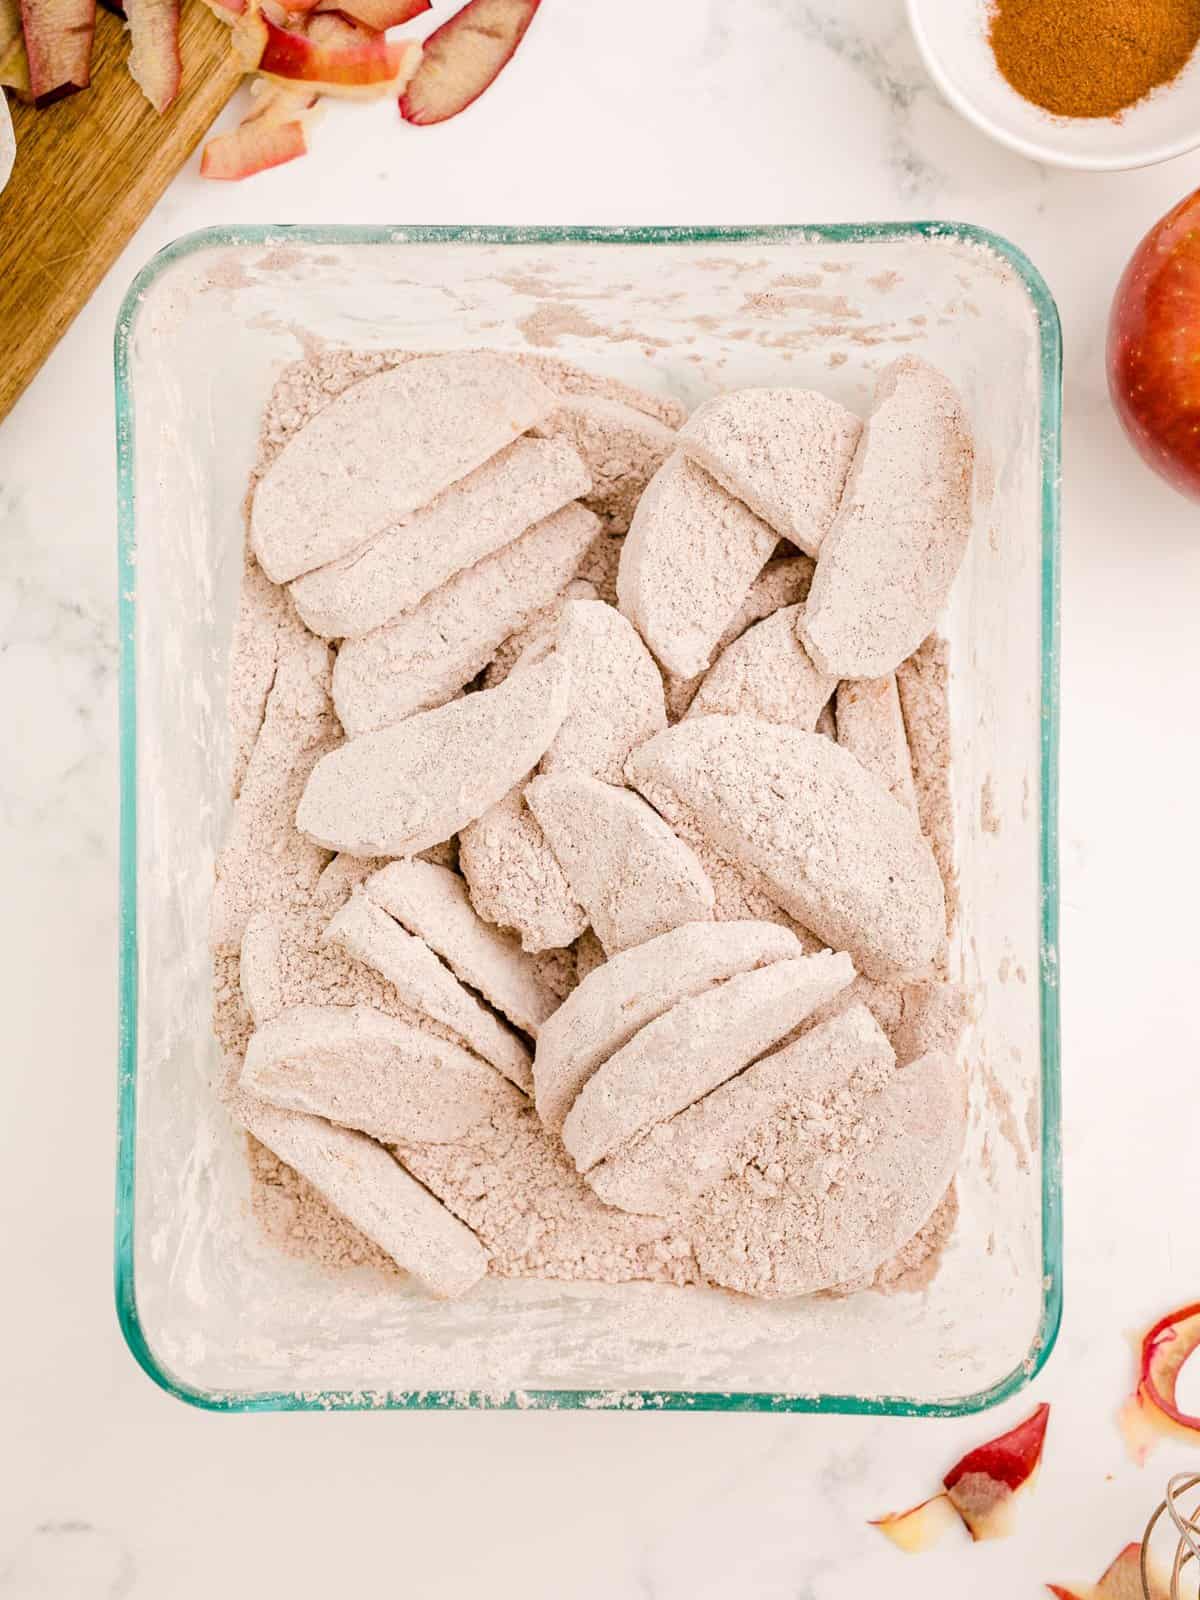 Apples coated in flour mixture in container.